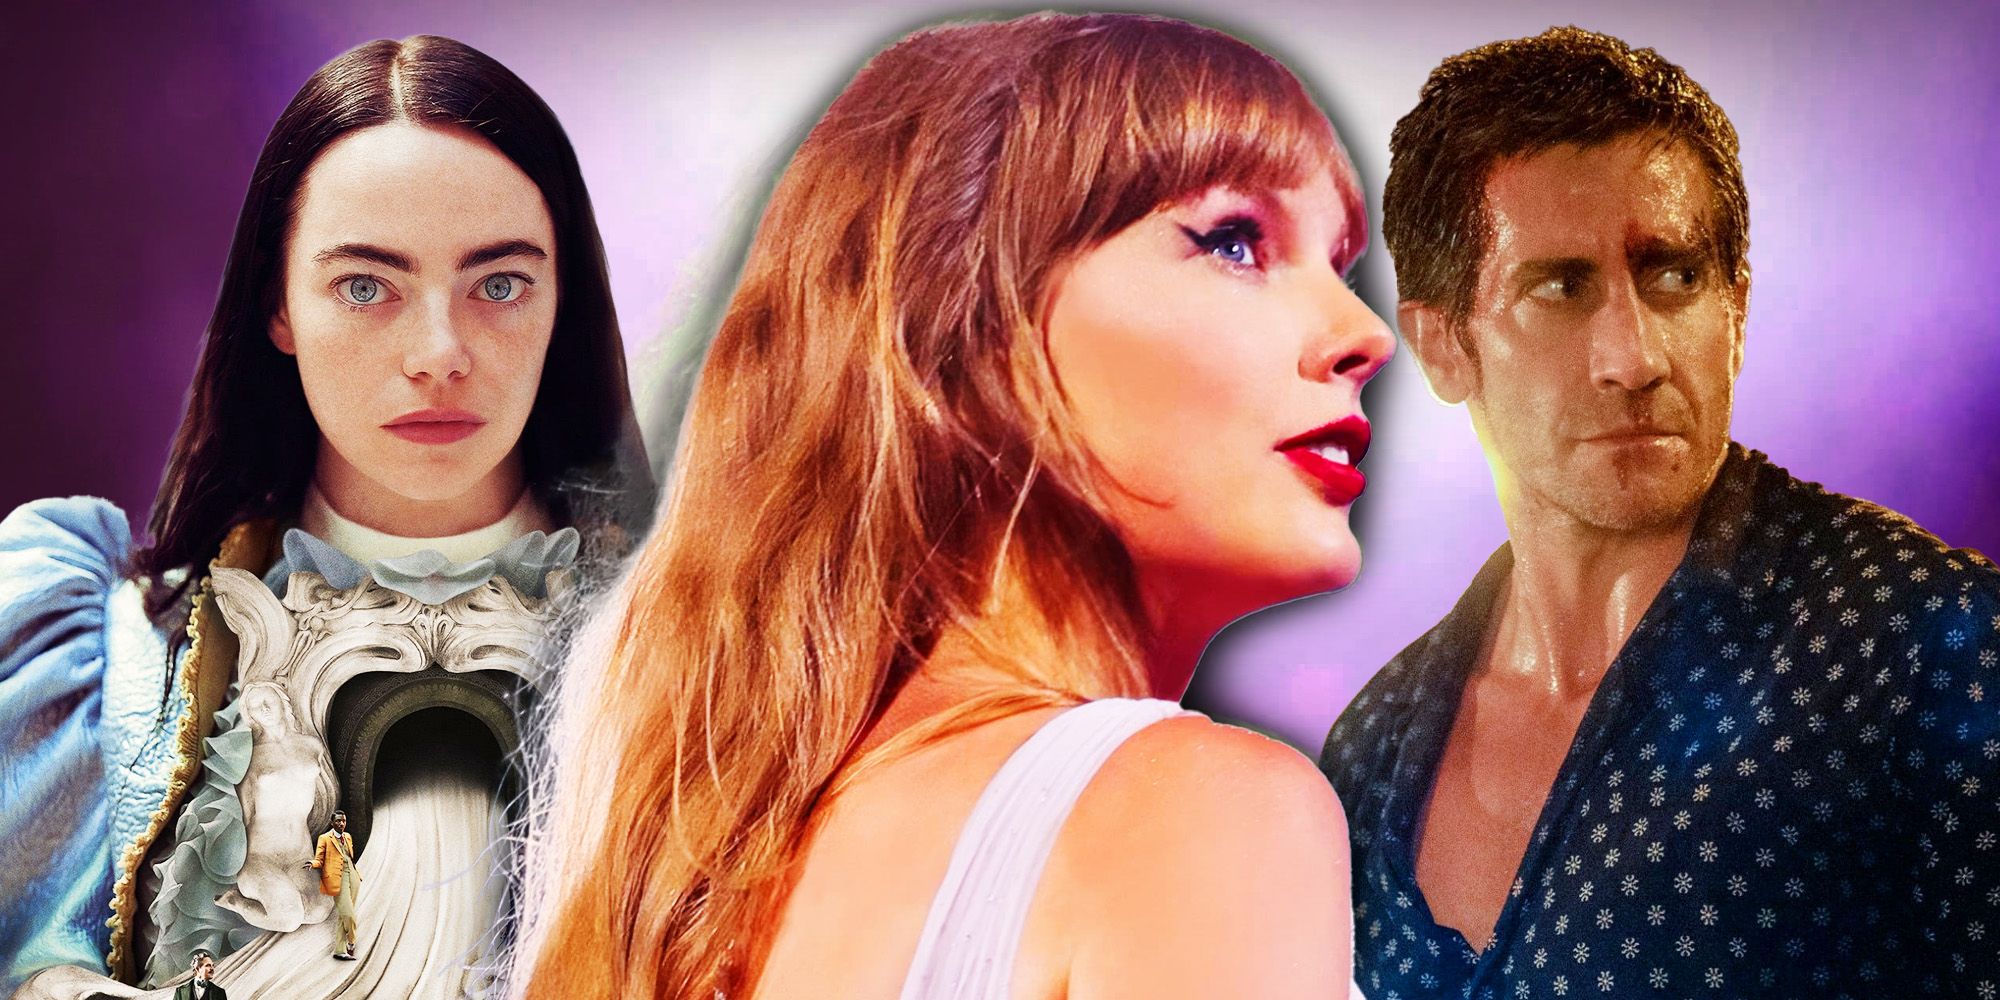 Poor Things, Taylor Swift- The Eras Tour, and the Jake Gyllenhaal Road House